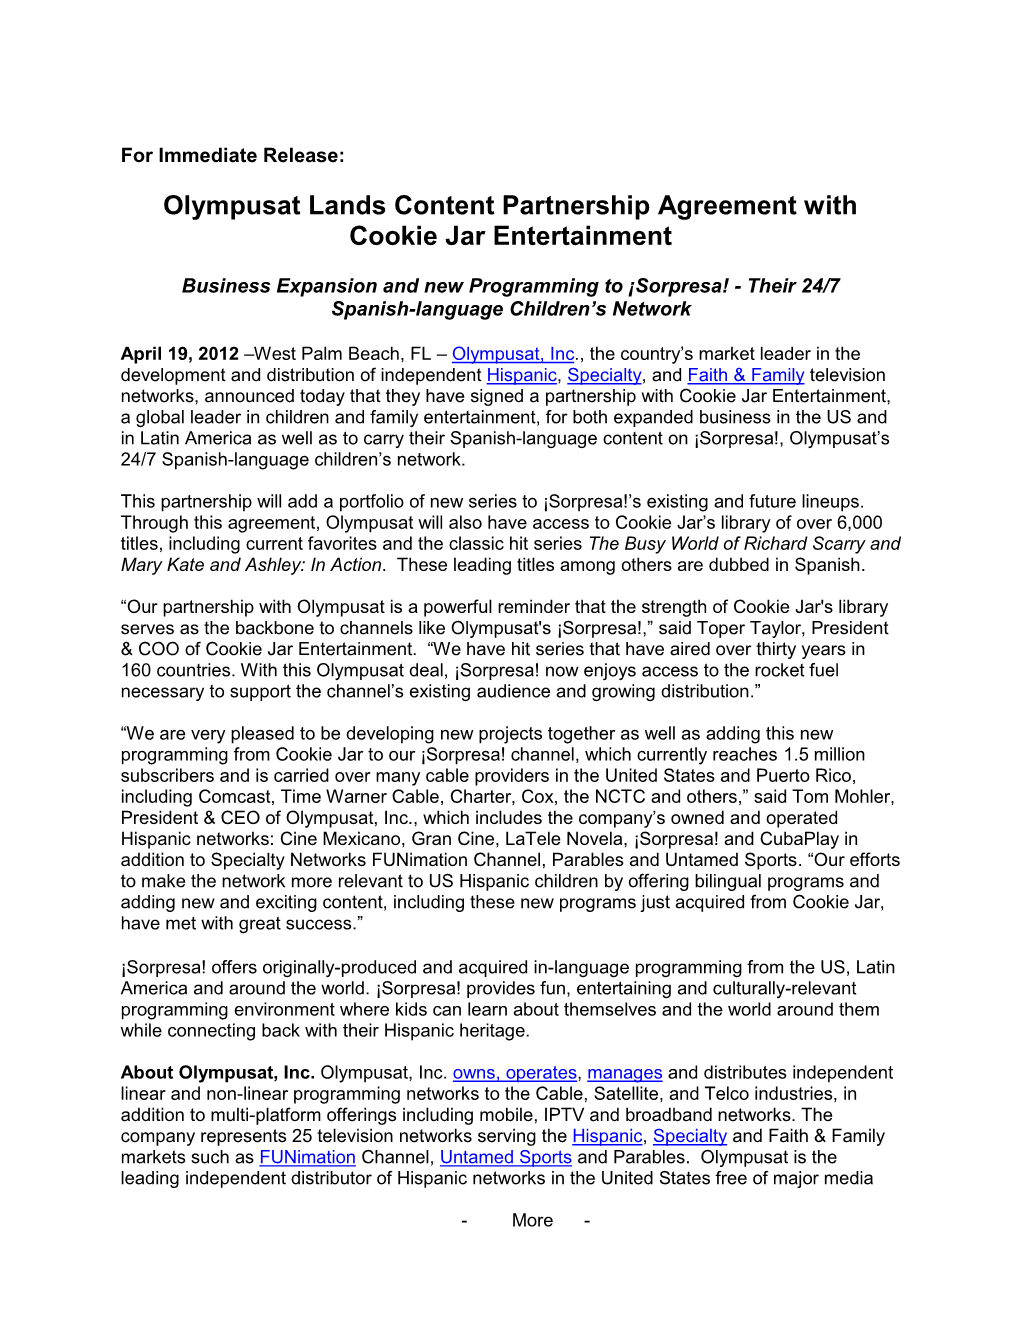 Olympusat Lands Content Partnership Agreement with Cookie Jar Entertainment